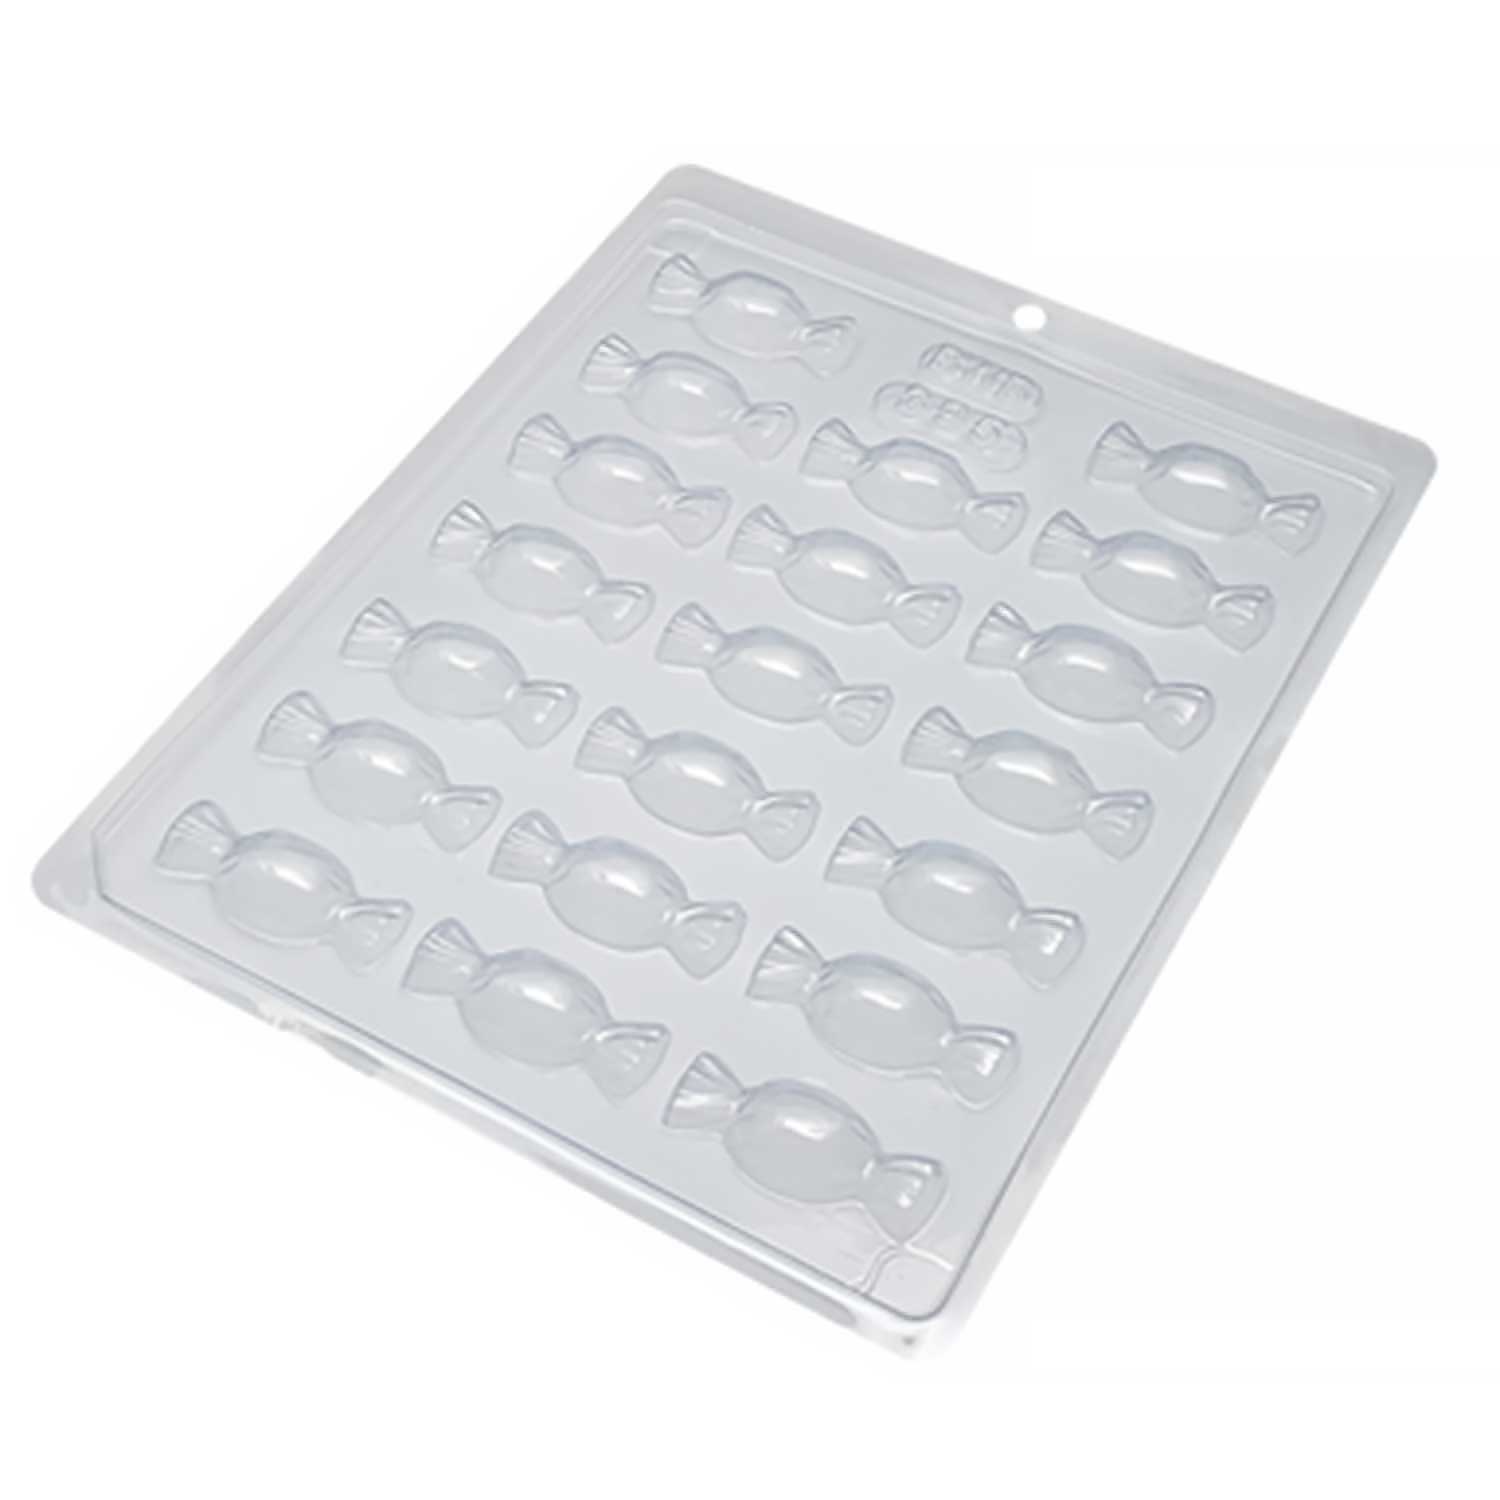 Candies Chocolate Mold